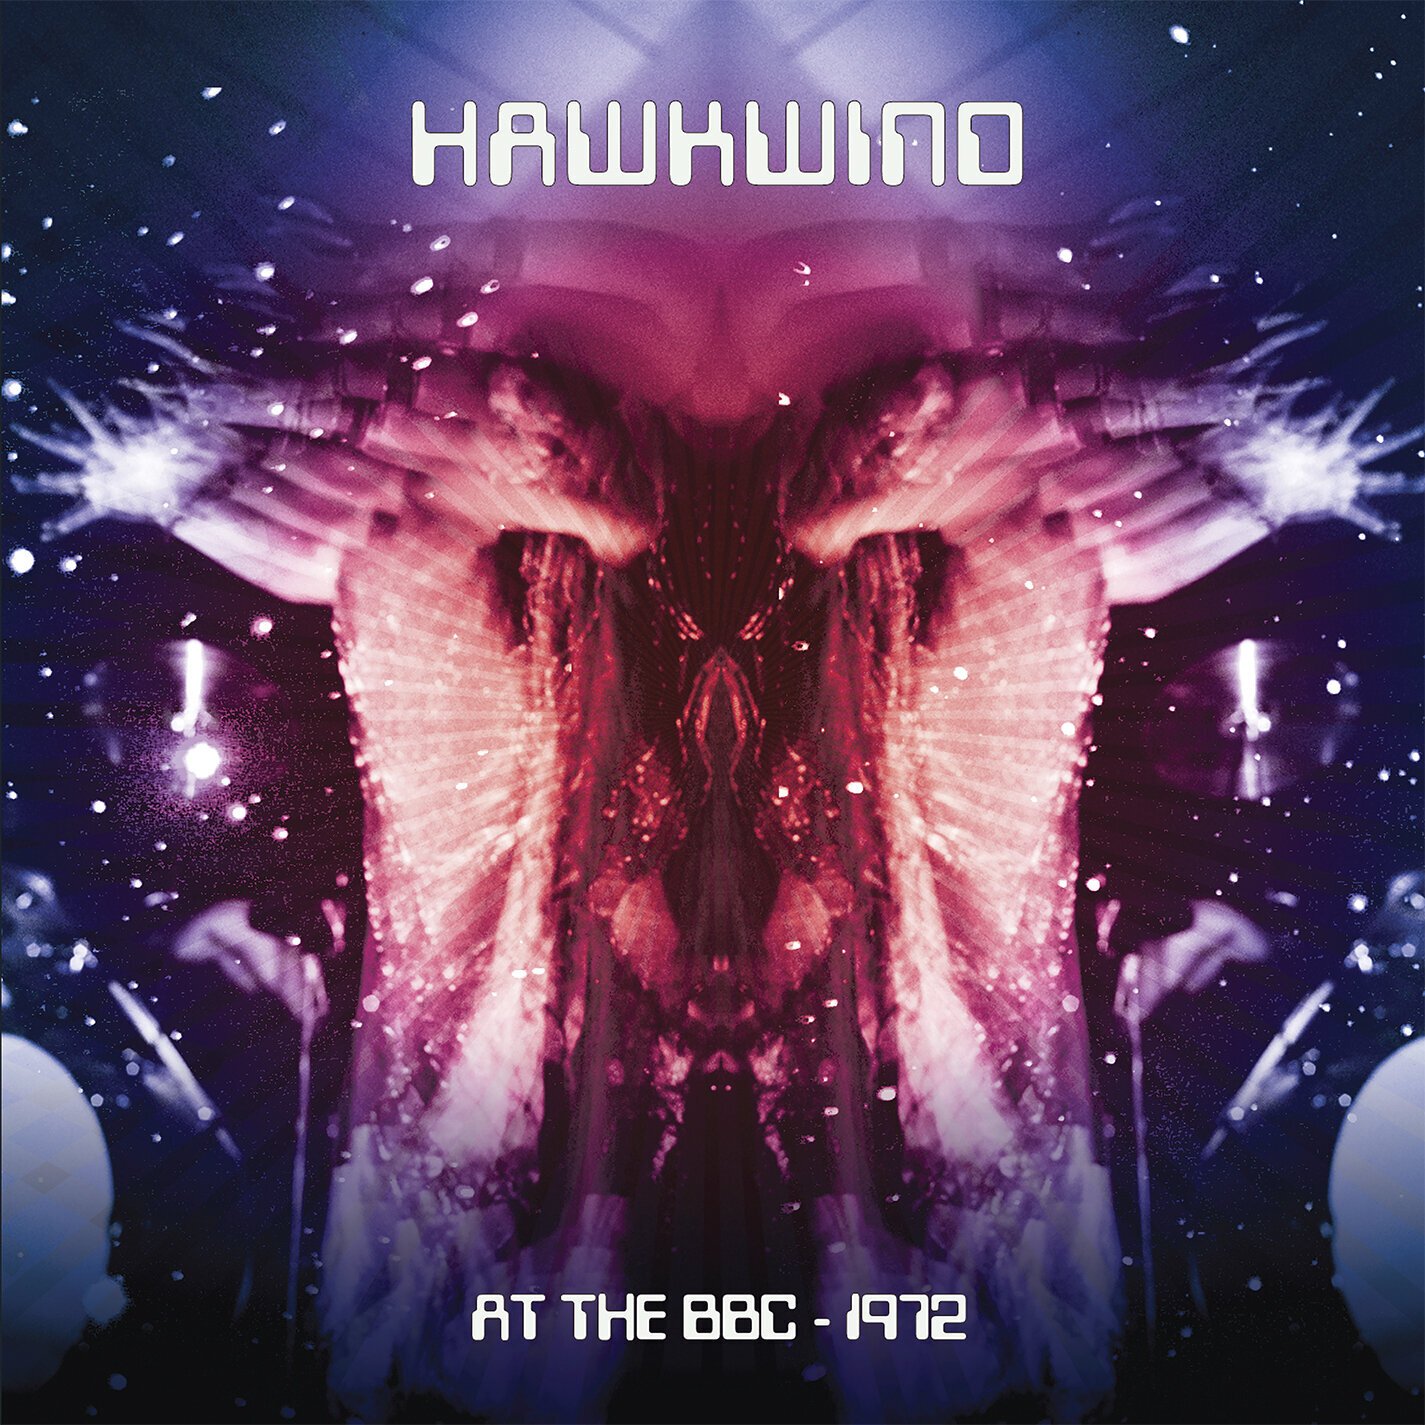 Disque vinyle Hawkwind - Hawkwind: At The BBC, 1972 (2 LP)